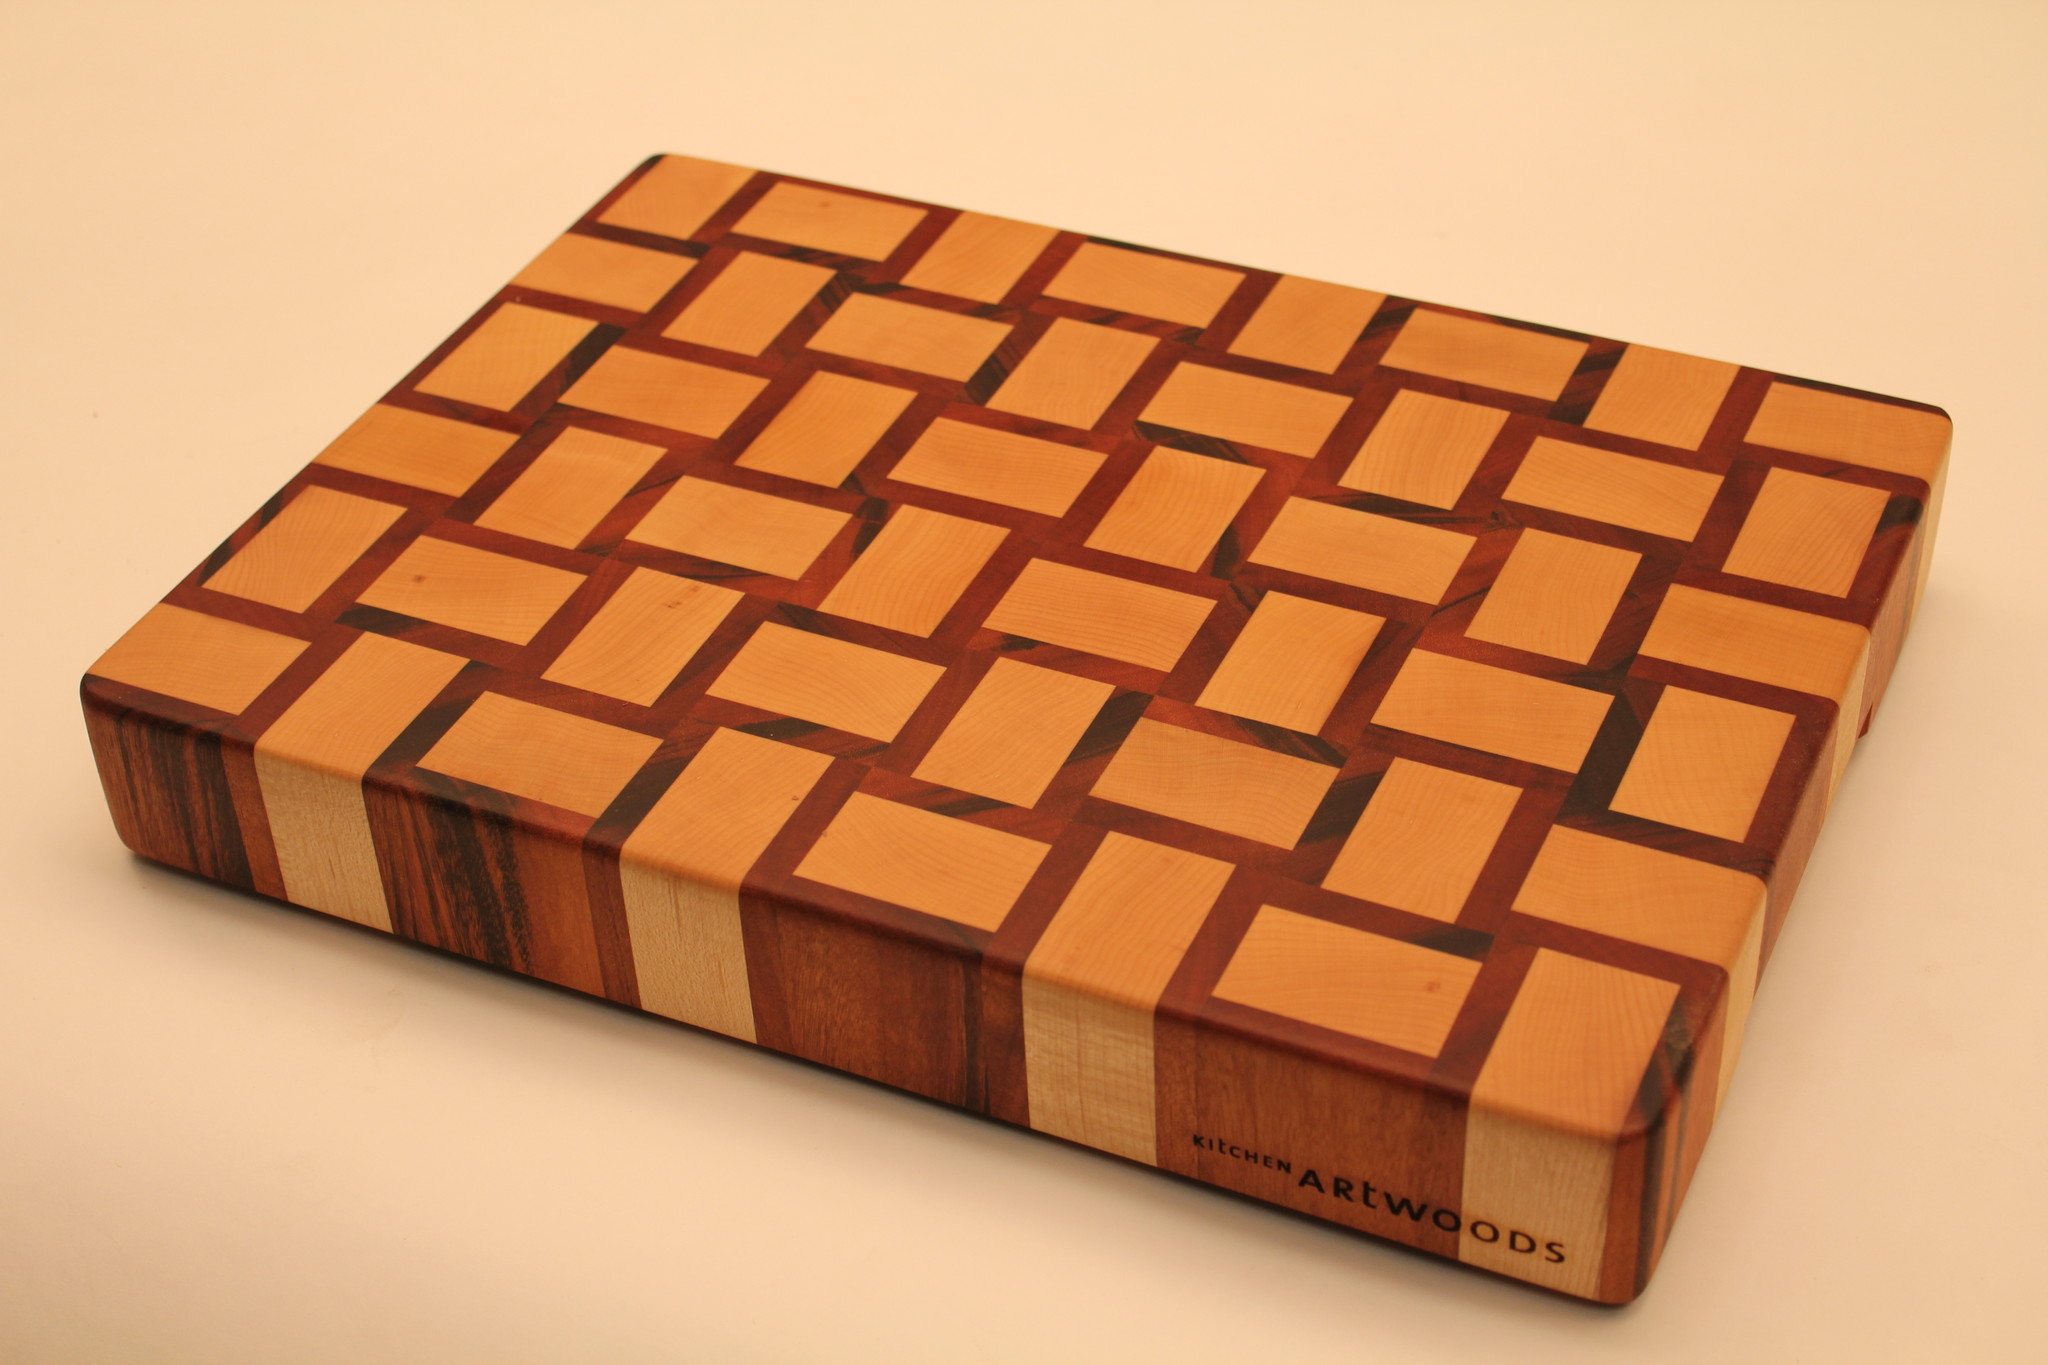 Kitchen Artwoods end grain cuttingboard with a woven patern of hard maple and tigerwood